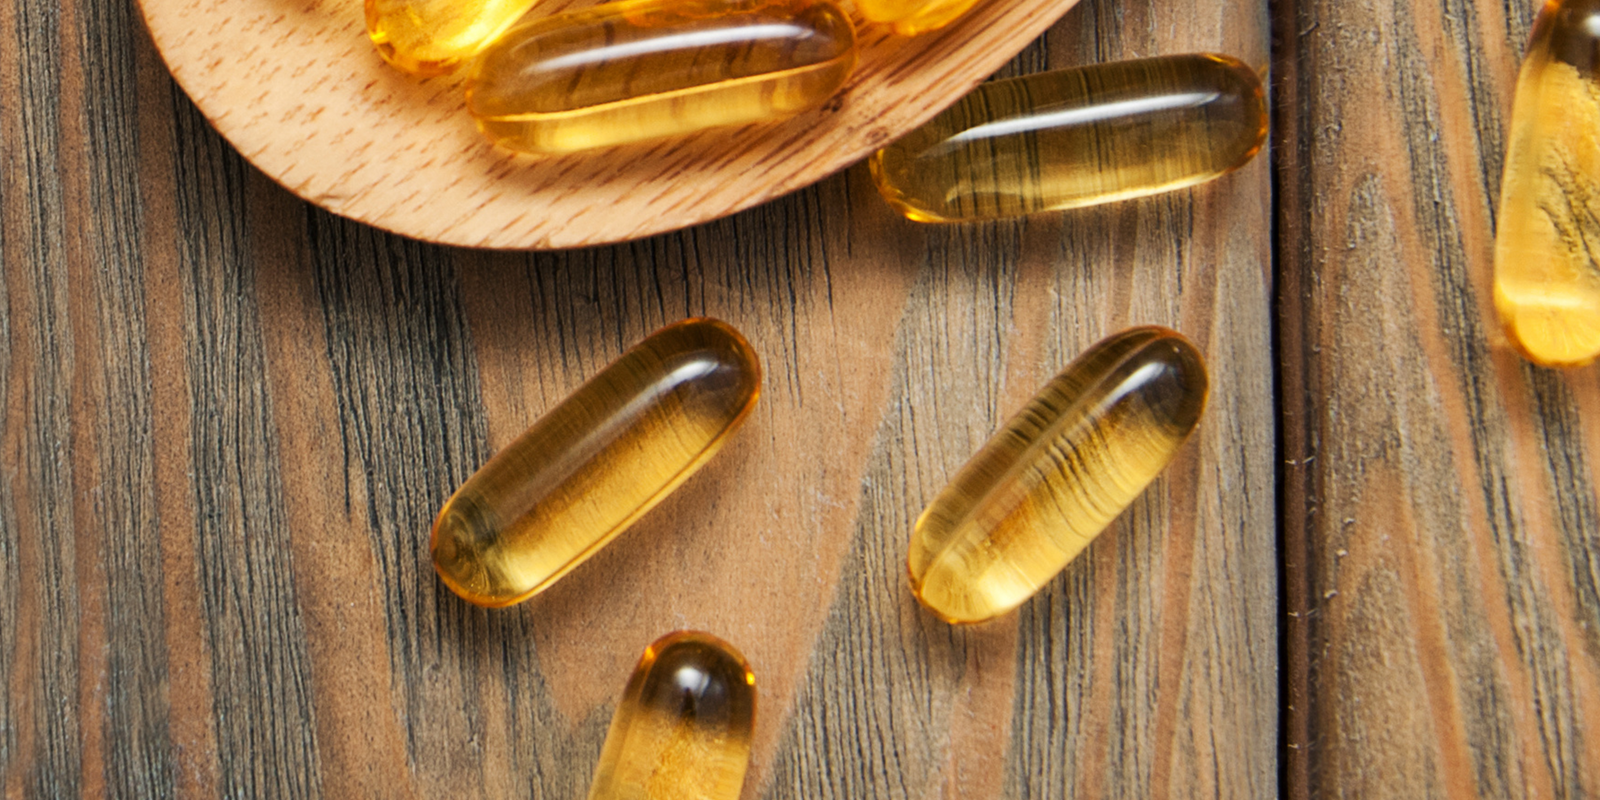 Vitamin D: what is it, and does it impact testosterone?